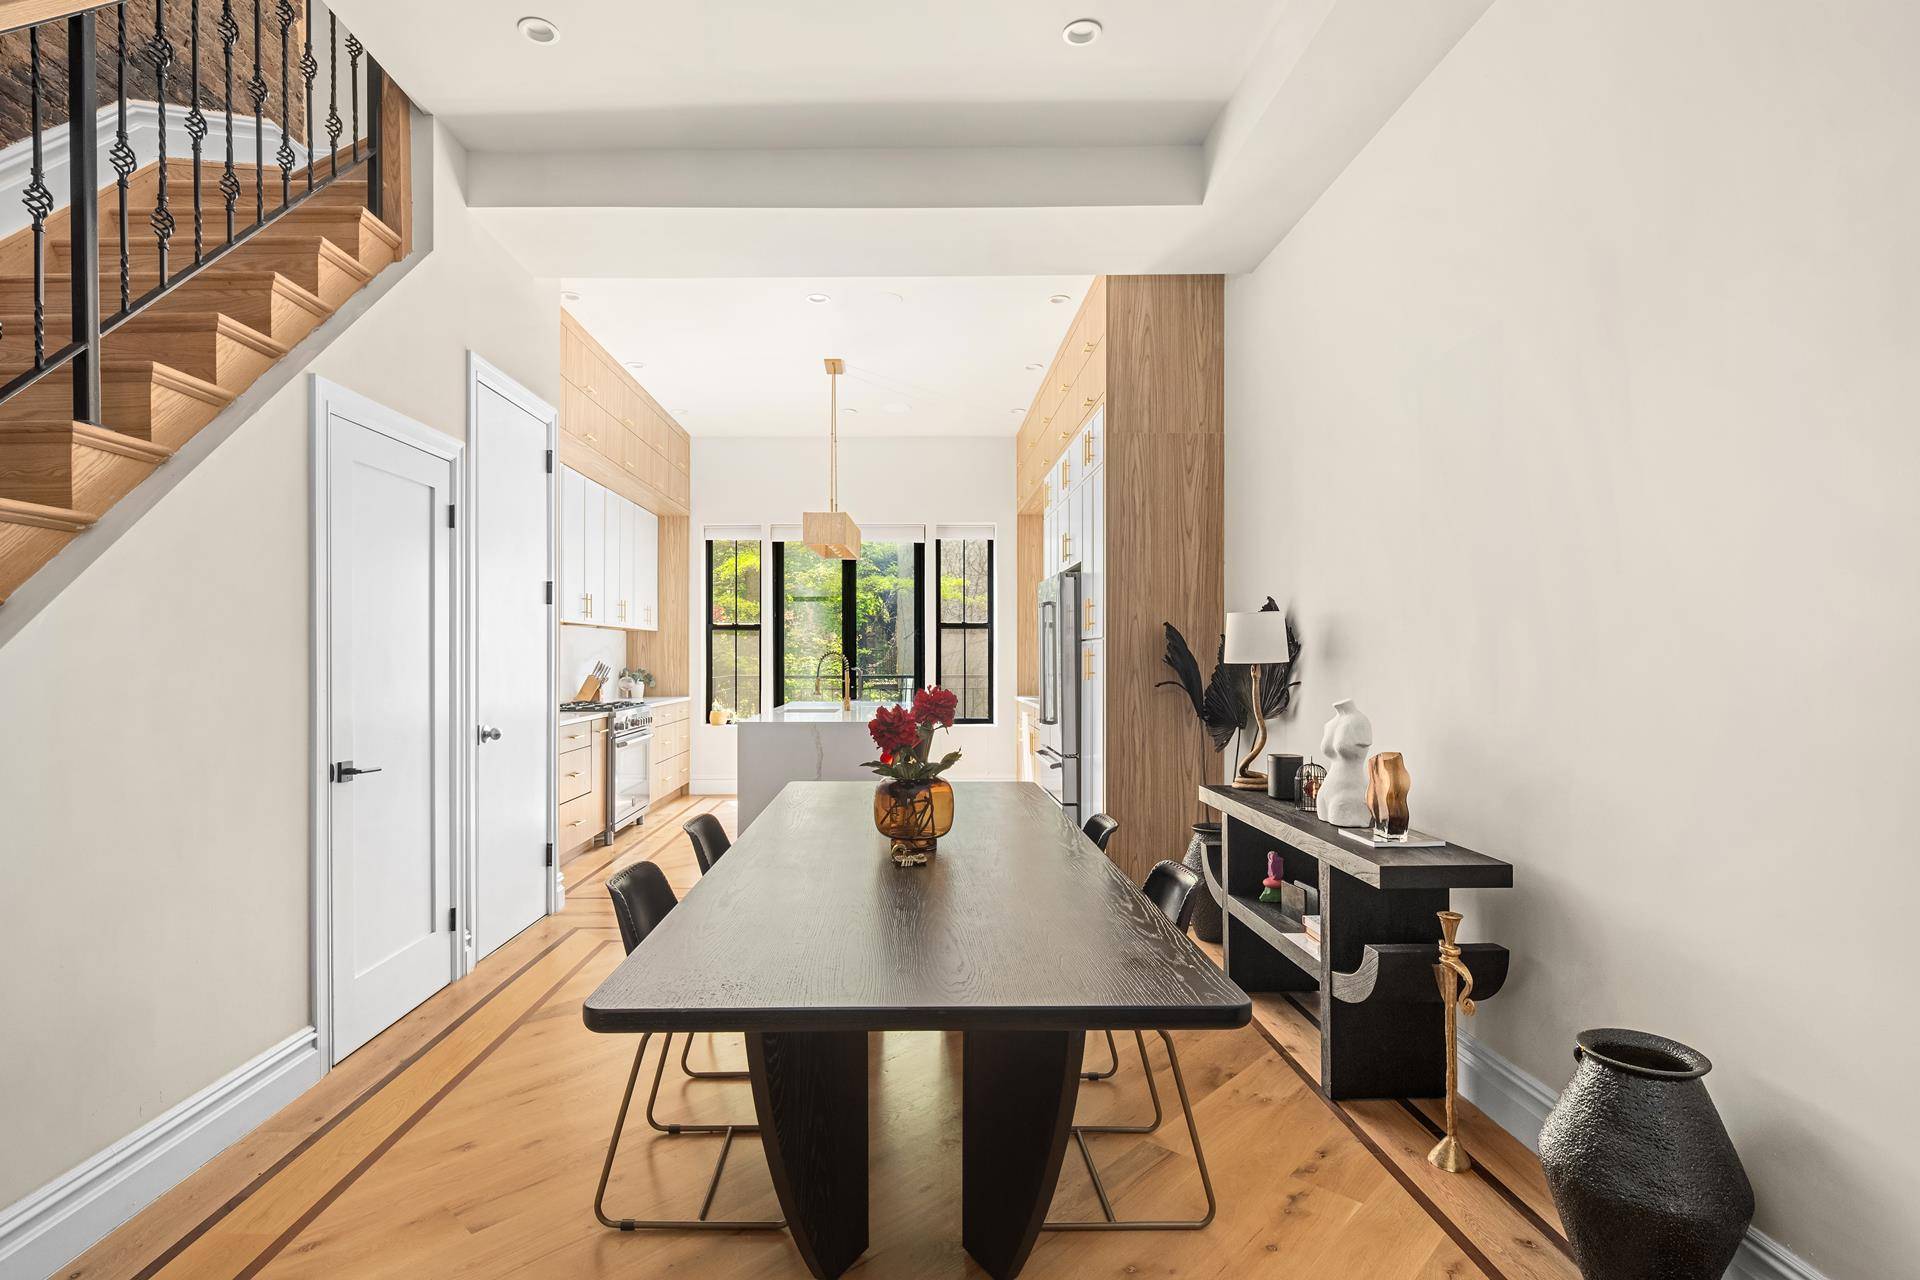 Discover the best of Brooklyn living in this breathtaking four story brownstone spanning 3183 sq.